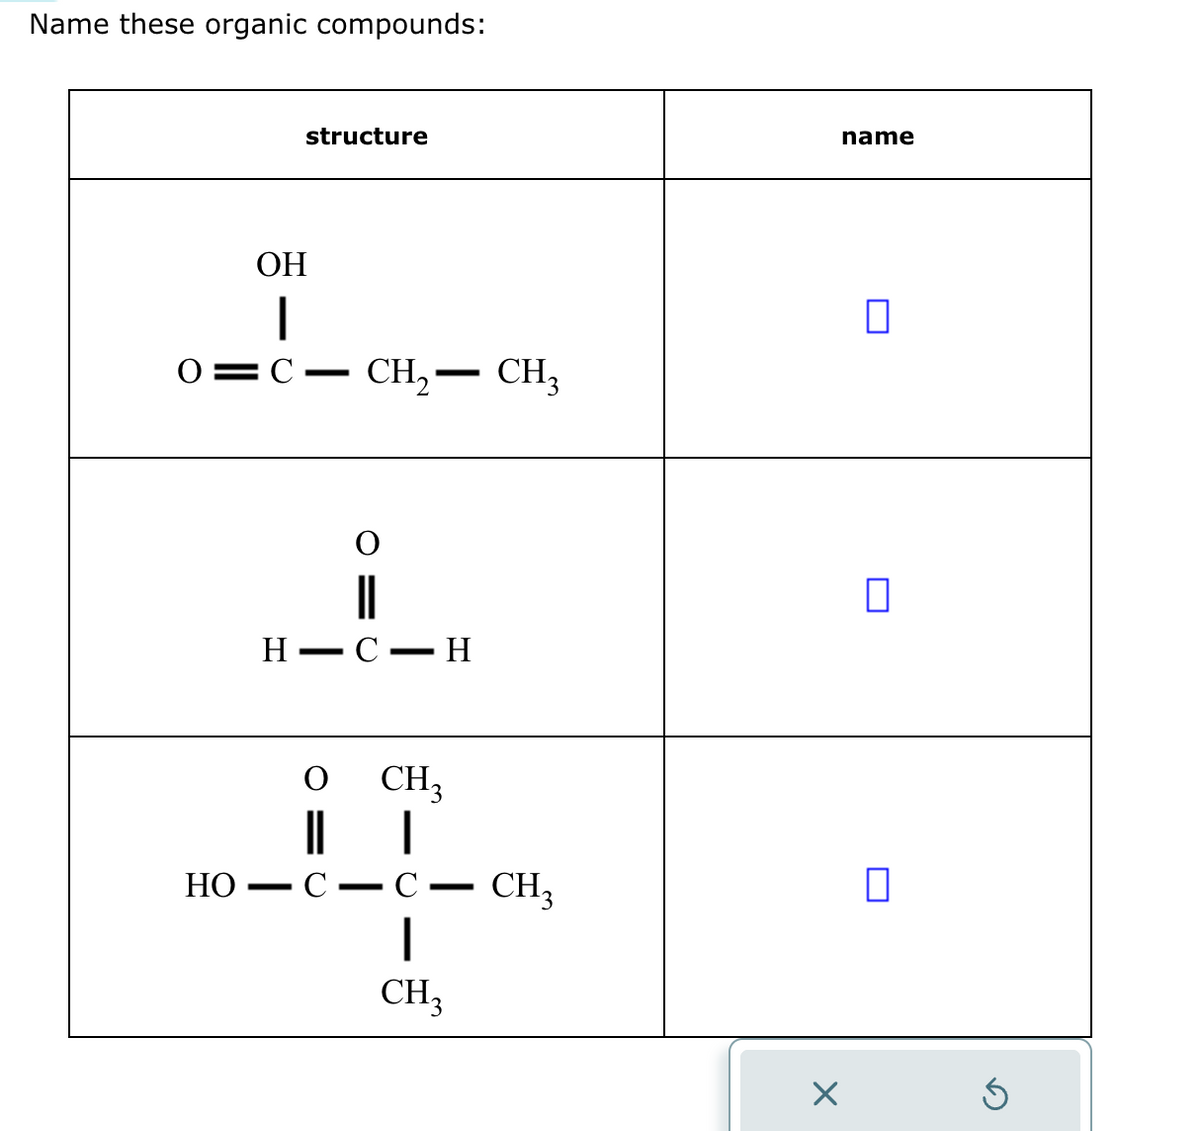 Name these organic compounds:
structure
OH
I
O=CCH₂— CH3
O
H-C-H
O
||
HO C
CH3
|
1
CH₂
CH3
X
name
0
0
0
G